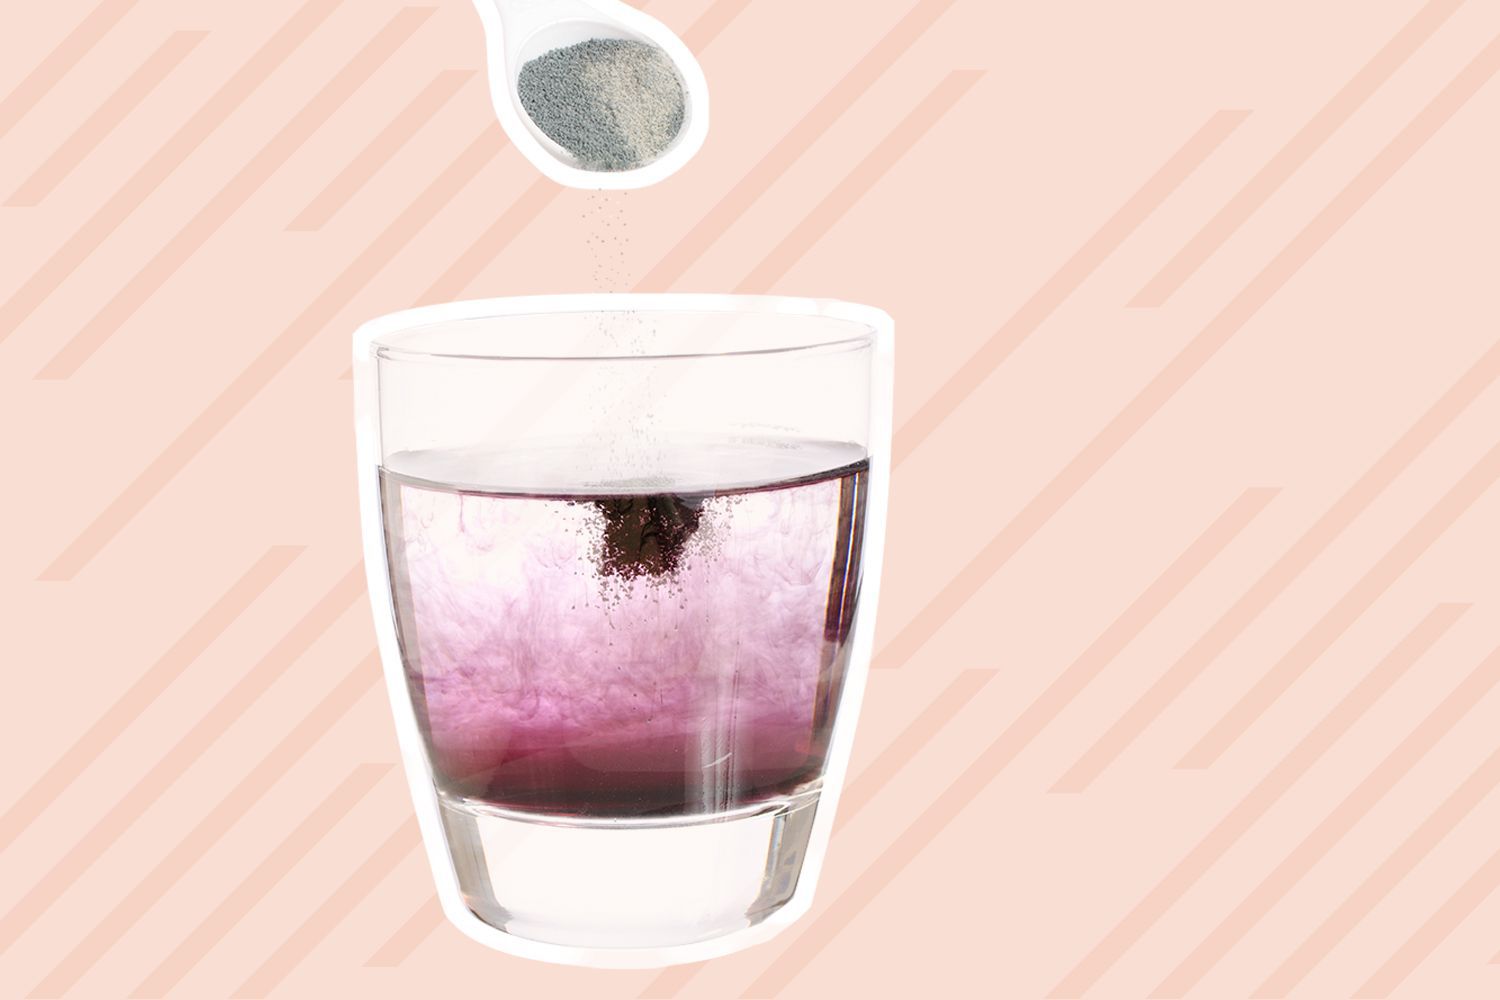 Spoonful of powder flavoring above a glass full of water displayed on a pink background